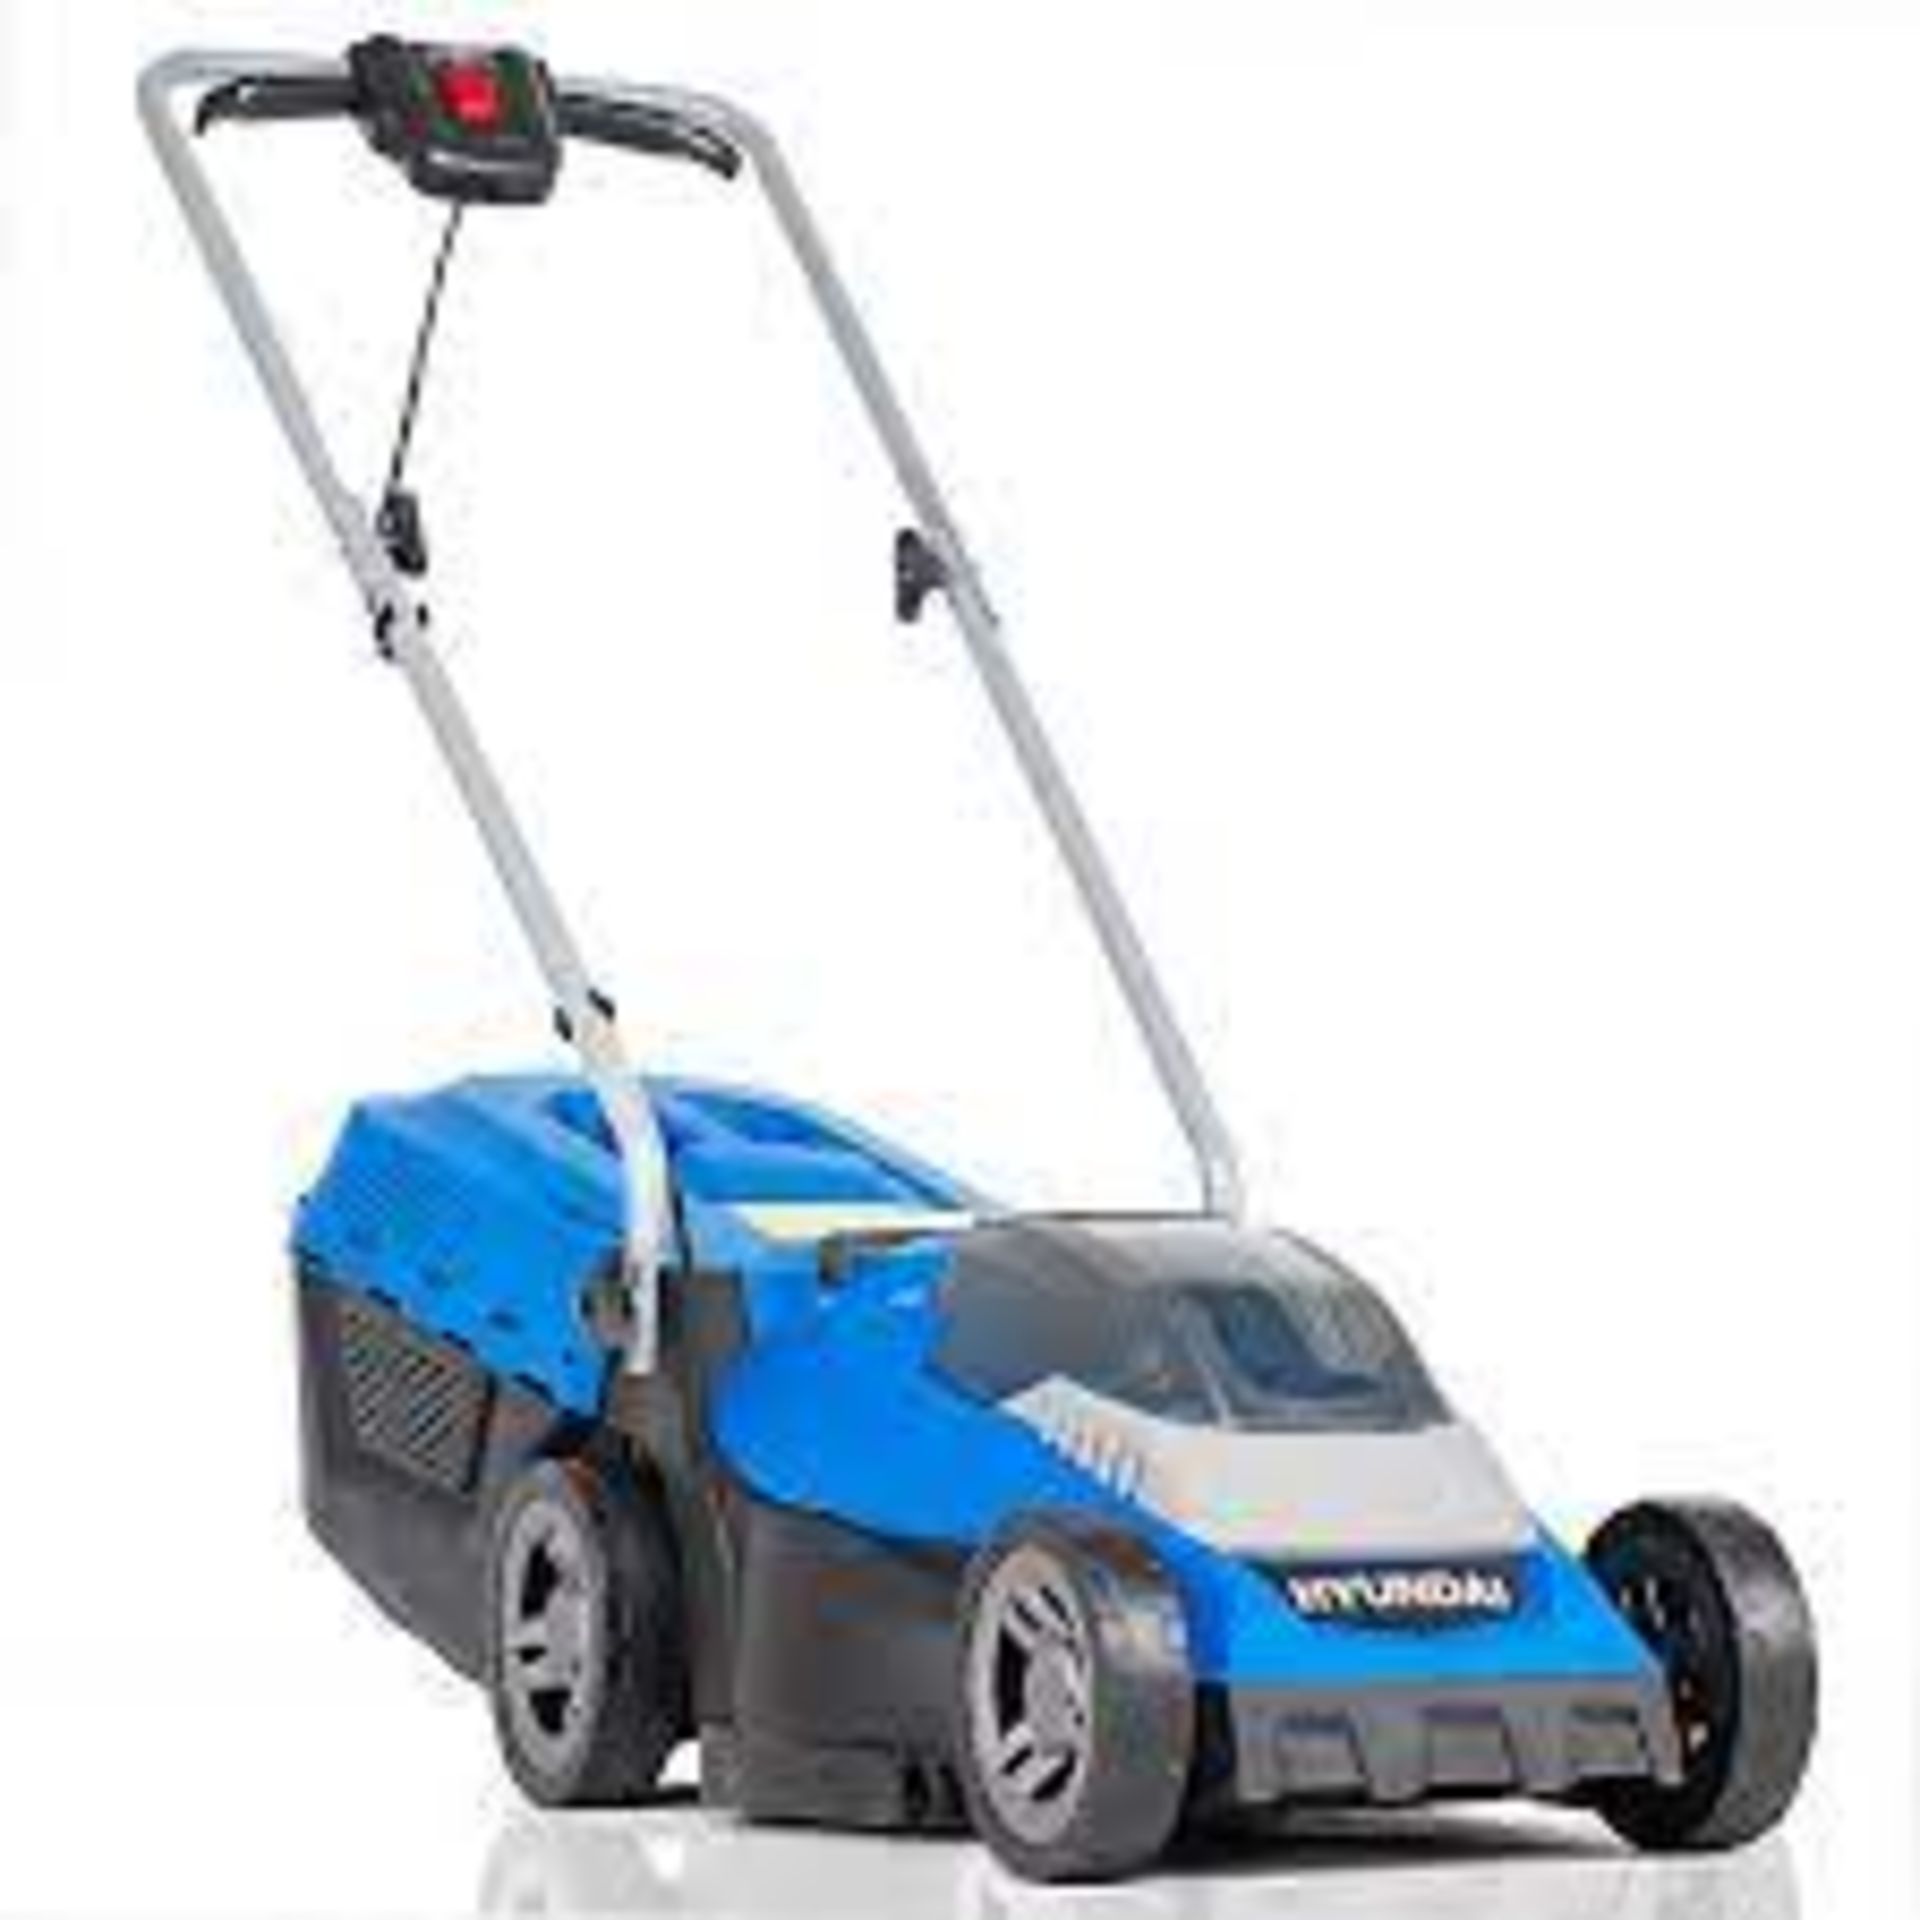 Hyundai 40V Lithium-Ion Cordless Battery Powered Roller Lawn Mower 33cm Cutting. - ER46. The